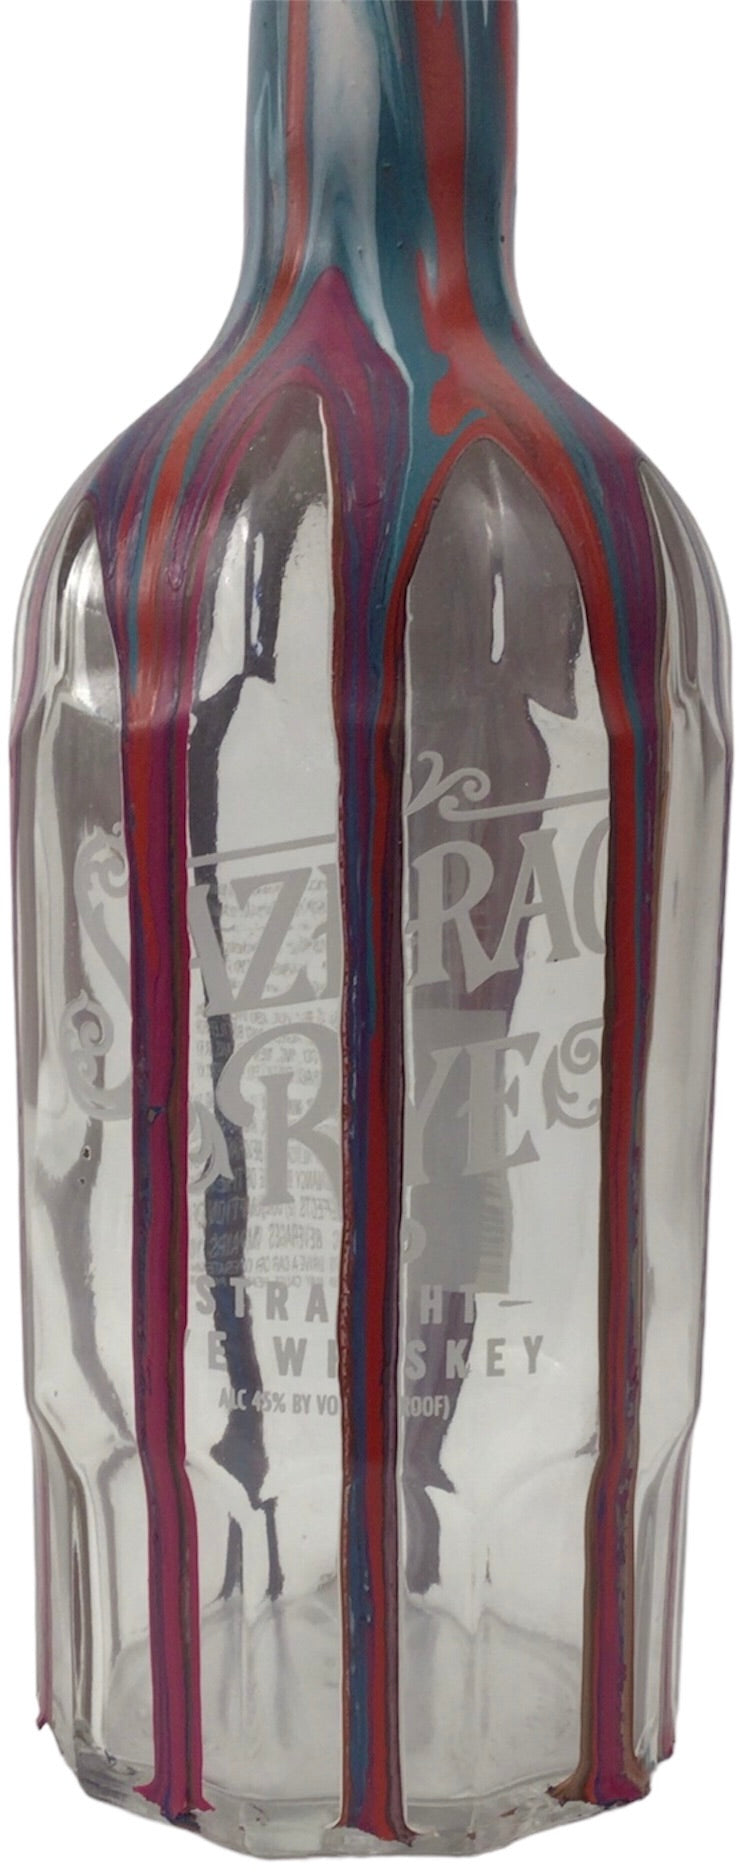 Hand Painted Sazerac Rye Whiskey Bottle - Remember your distillery trip with bright decor your partner will love!